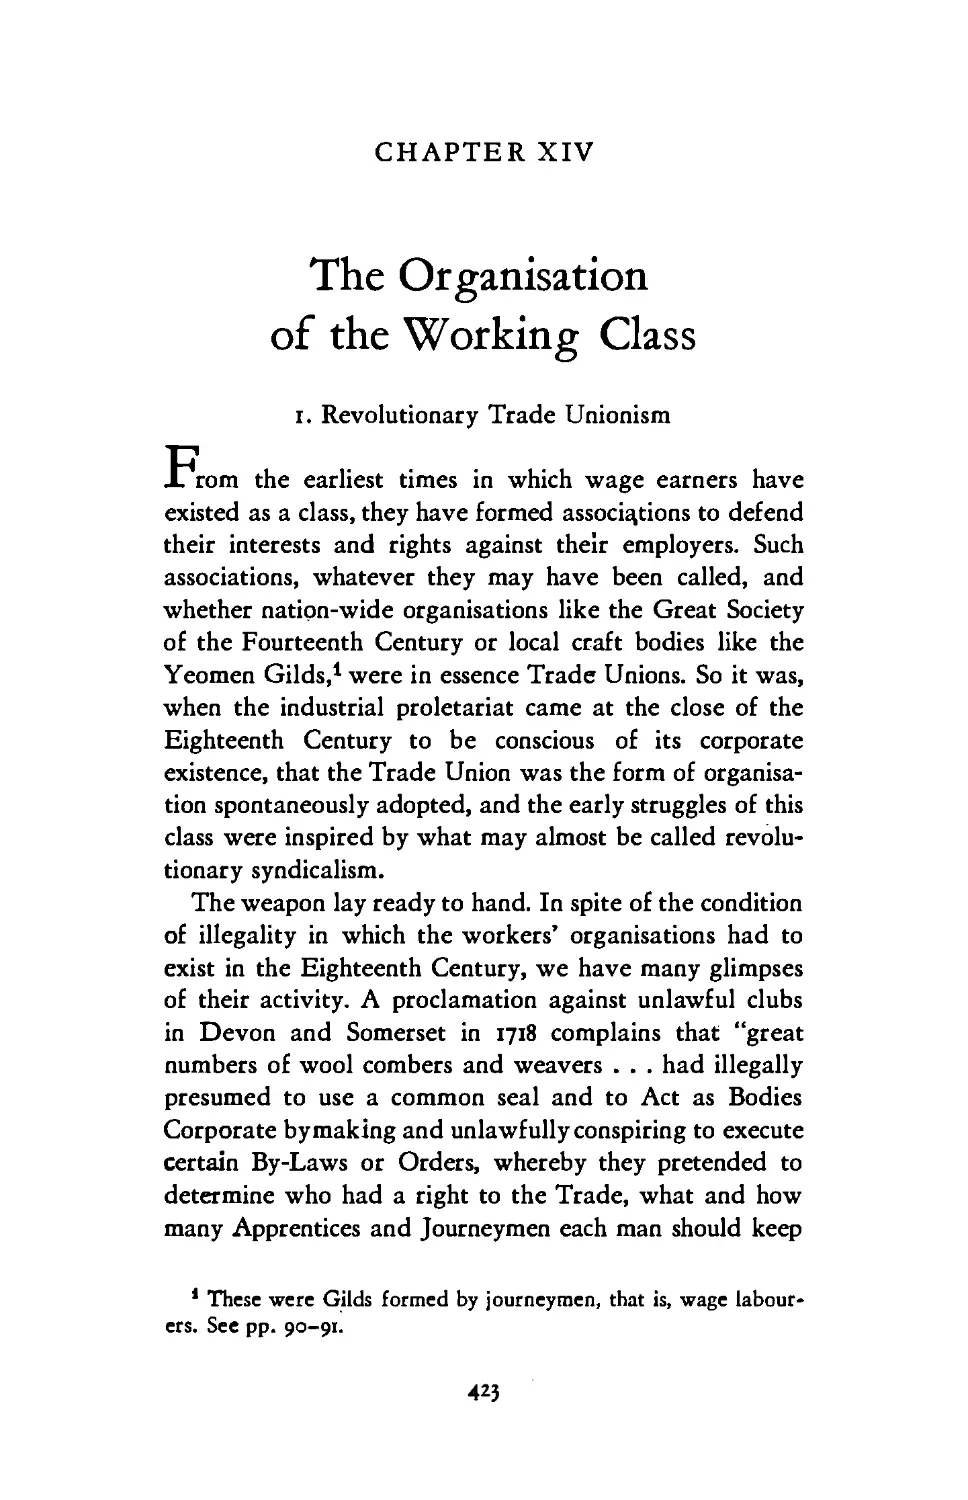 XIV The Organisation of the Working Class